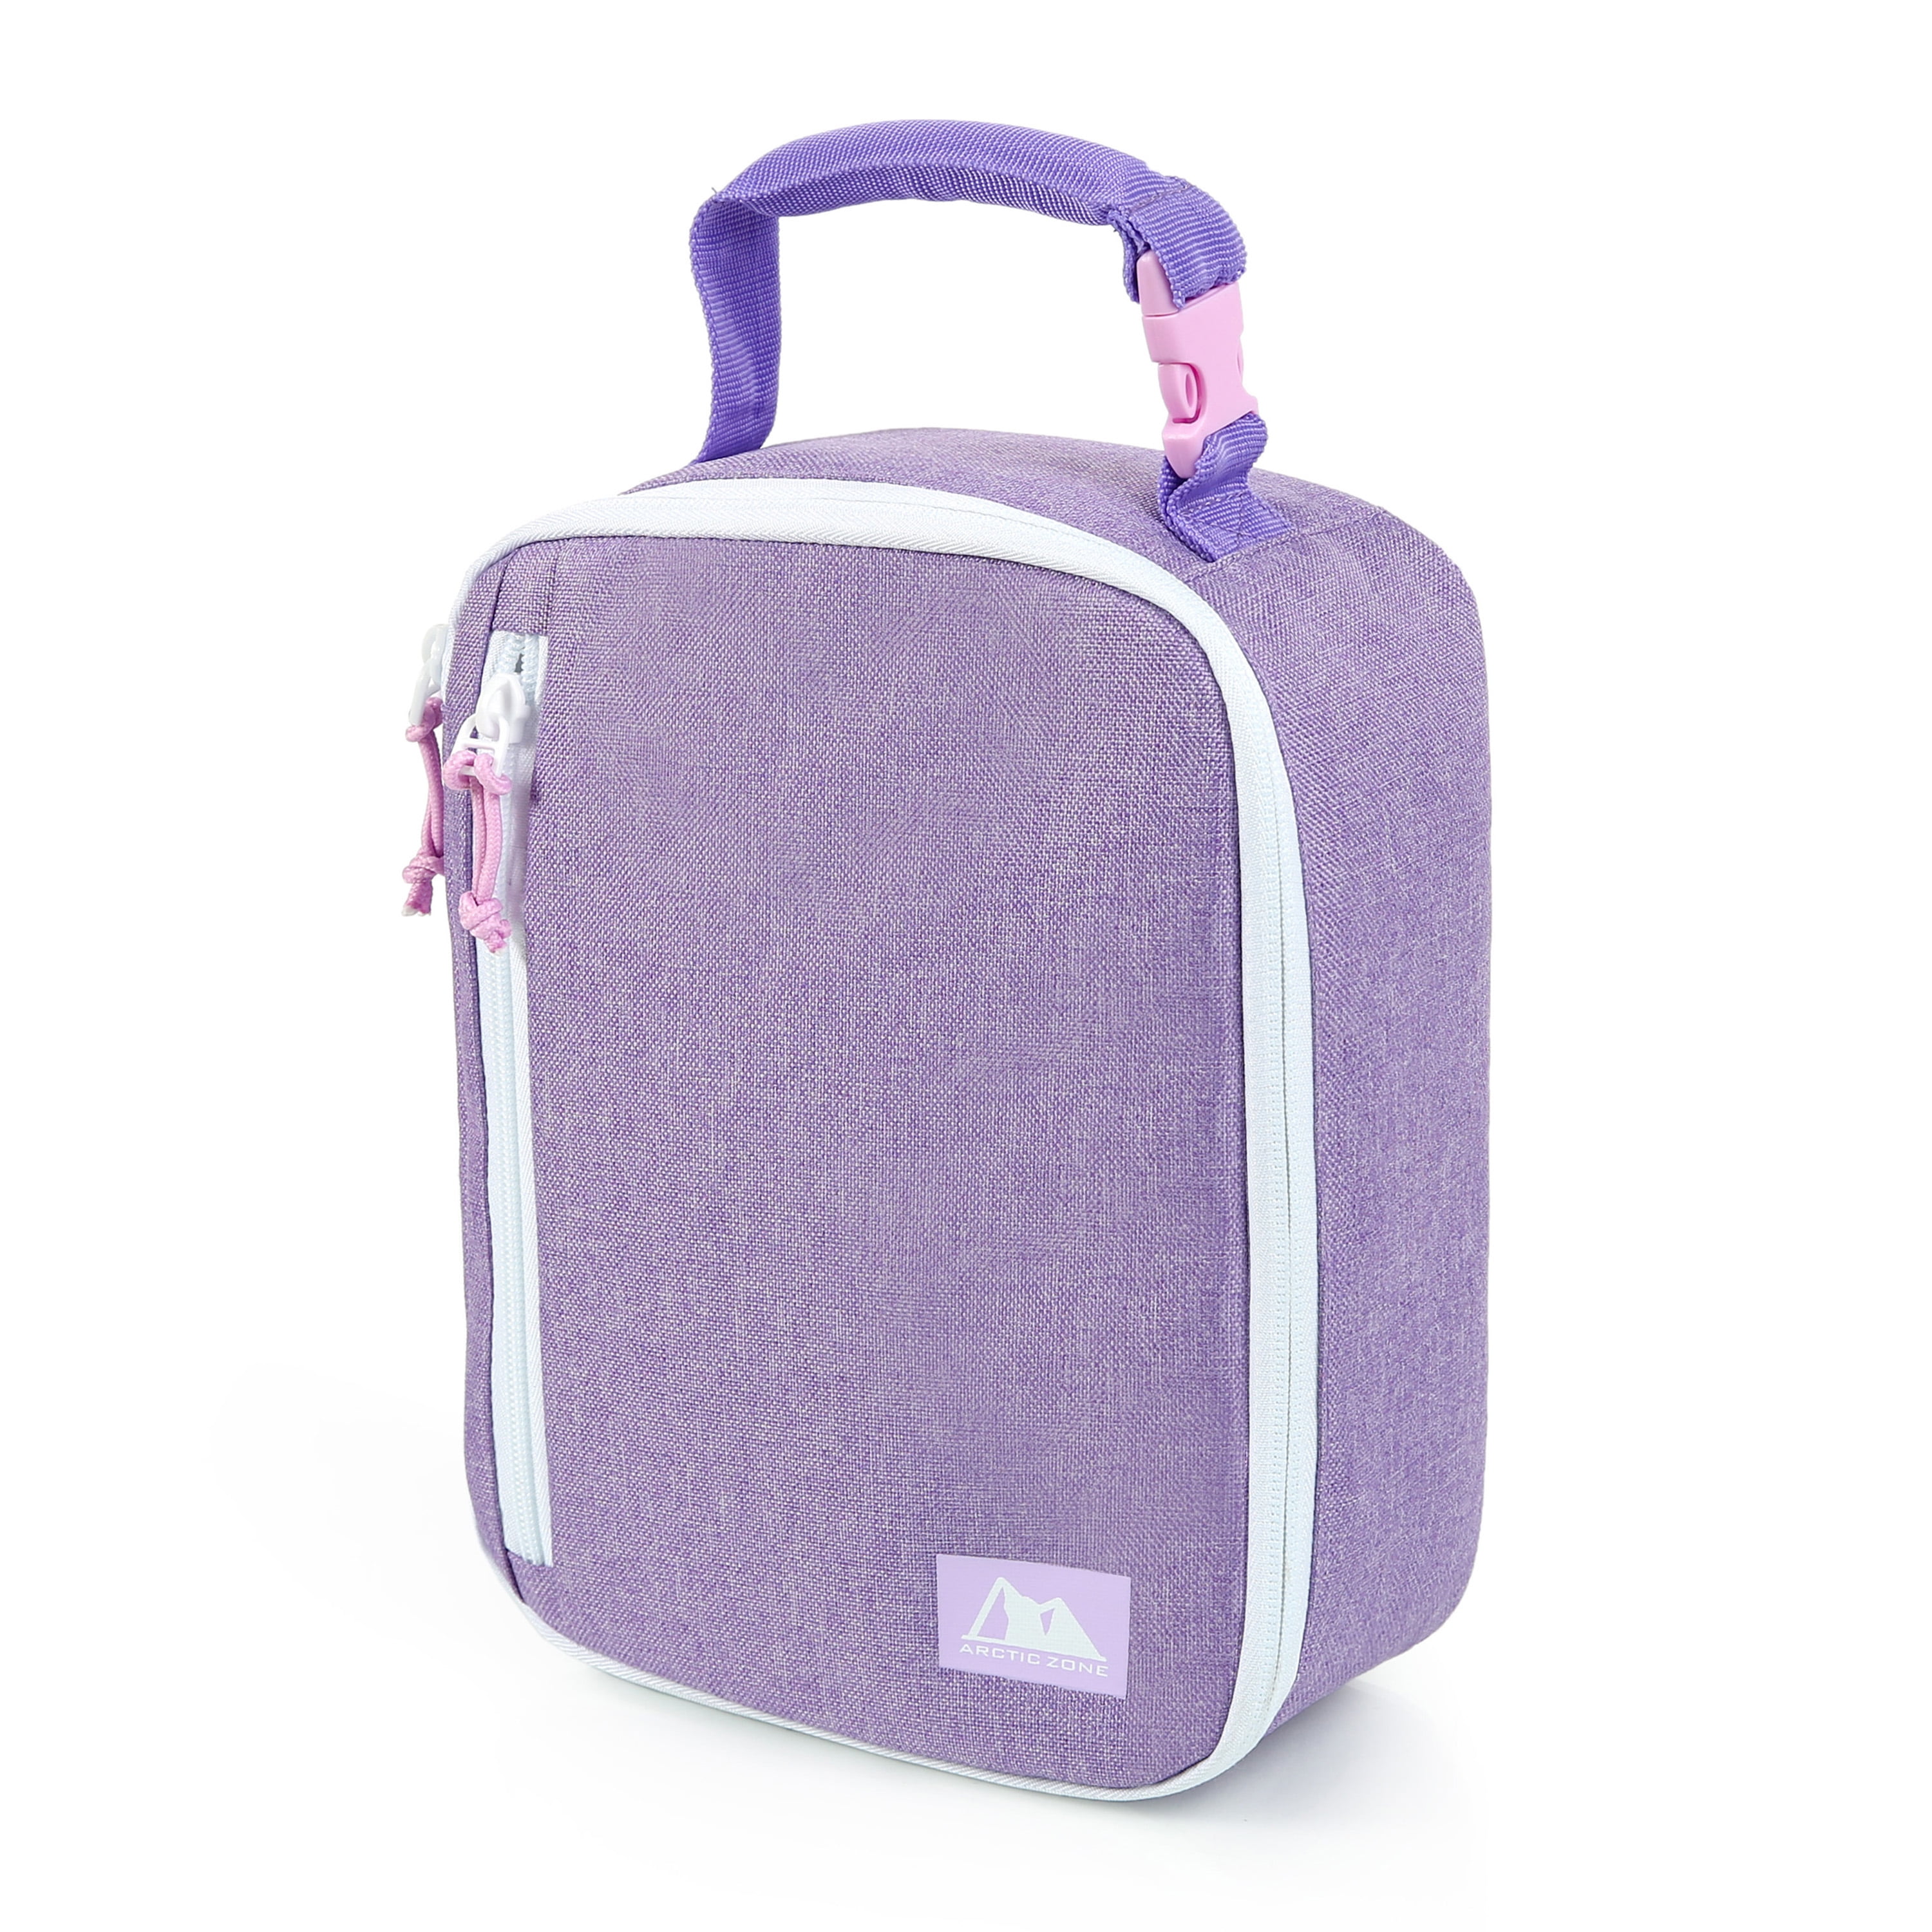 Arctic Zone Lunch Box with Accessories and Microban Protected Lining,  Gingham